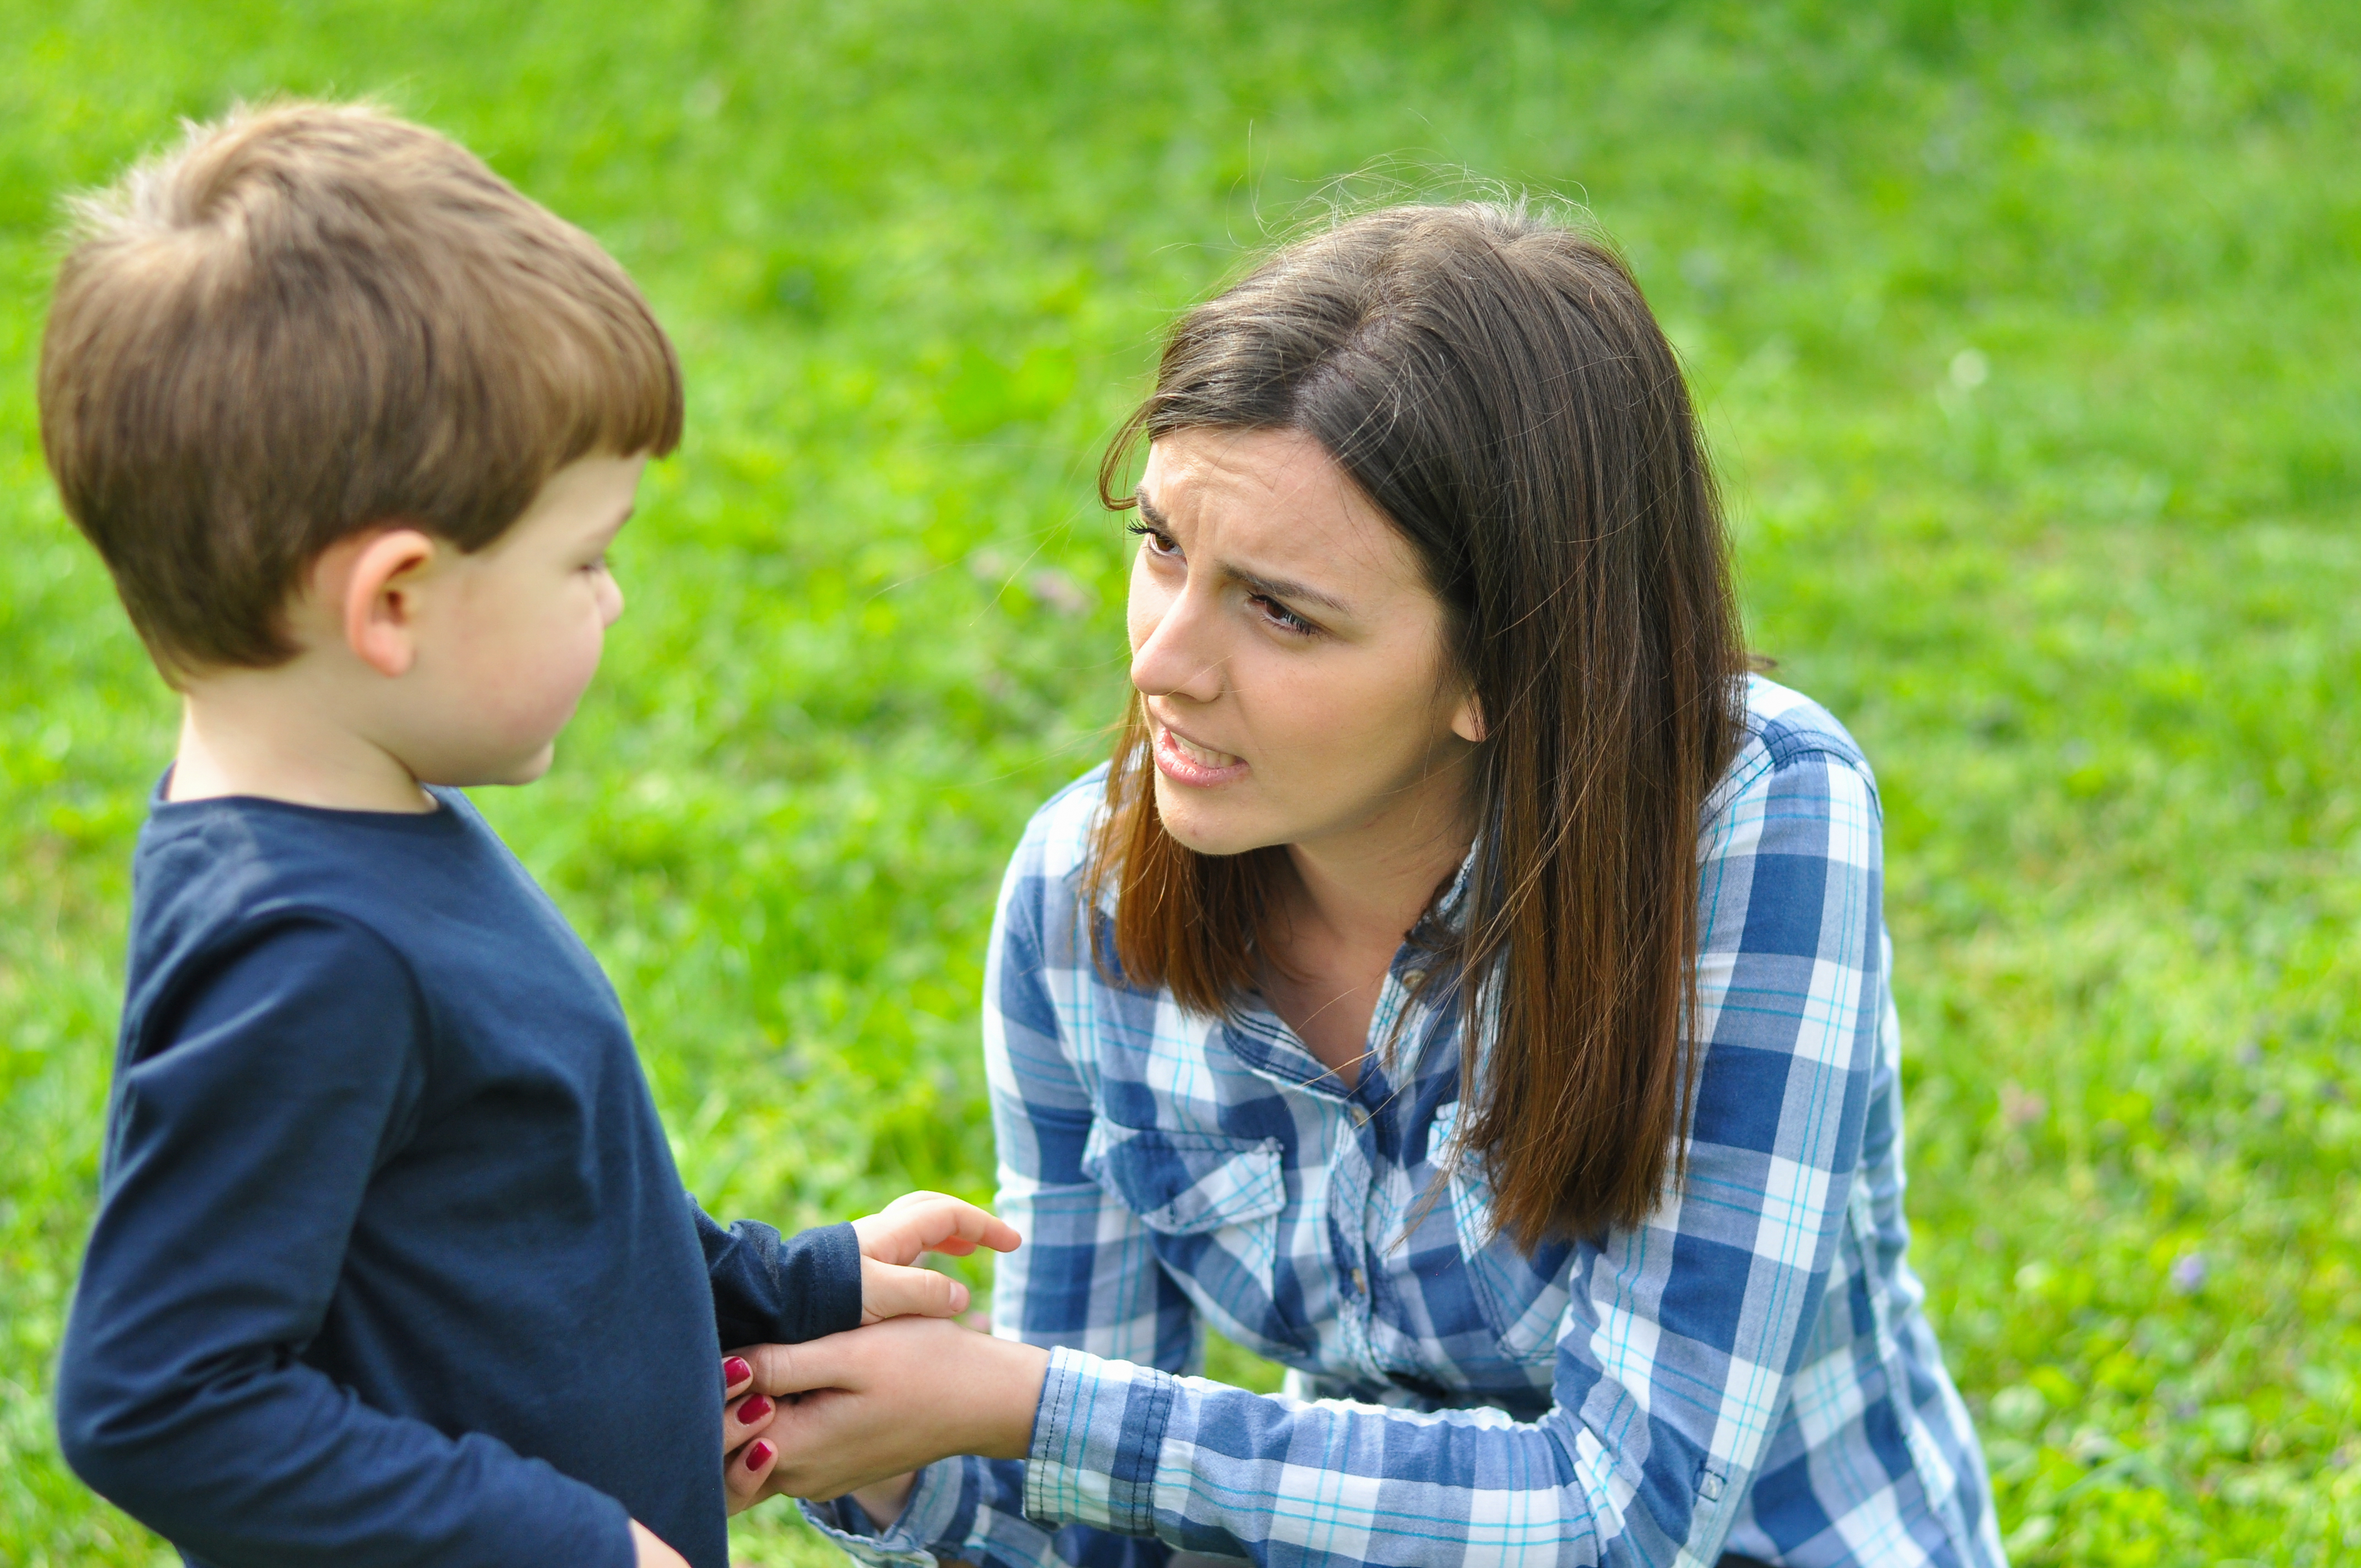 A woman talking to a child | Source: Shutterstock